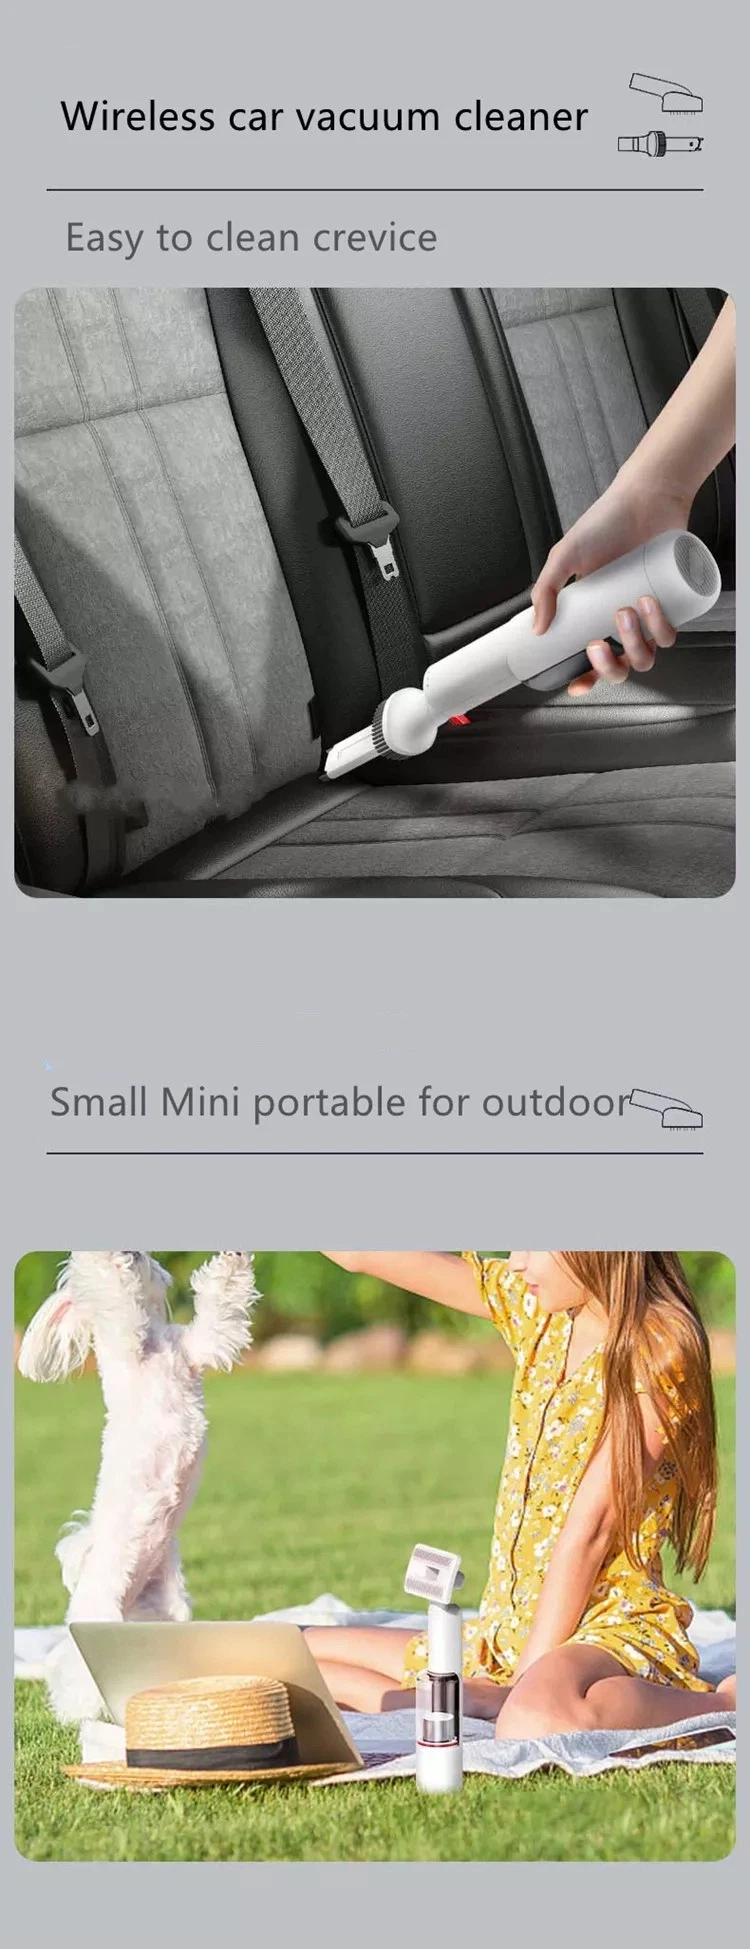 Strong Suction Powerful Wireless Rechargeable Handheld USB Mini Portable Car Vacuum Cleaner Machine for Pets